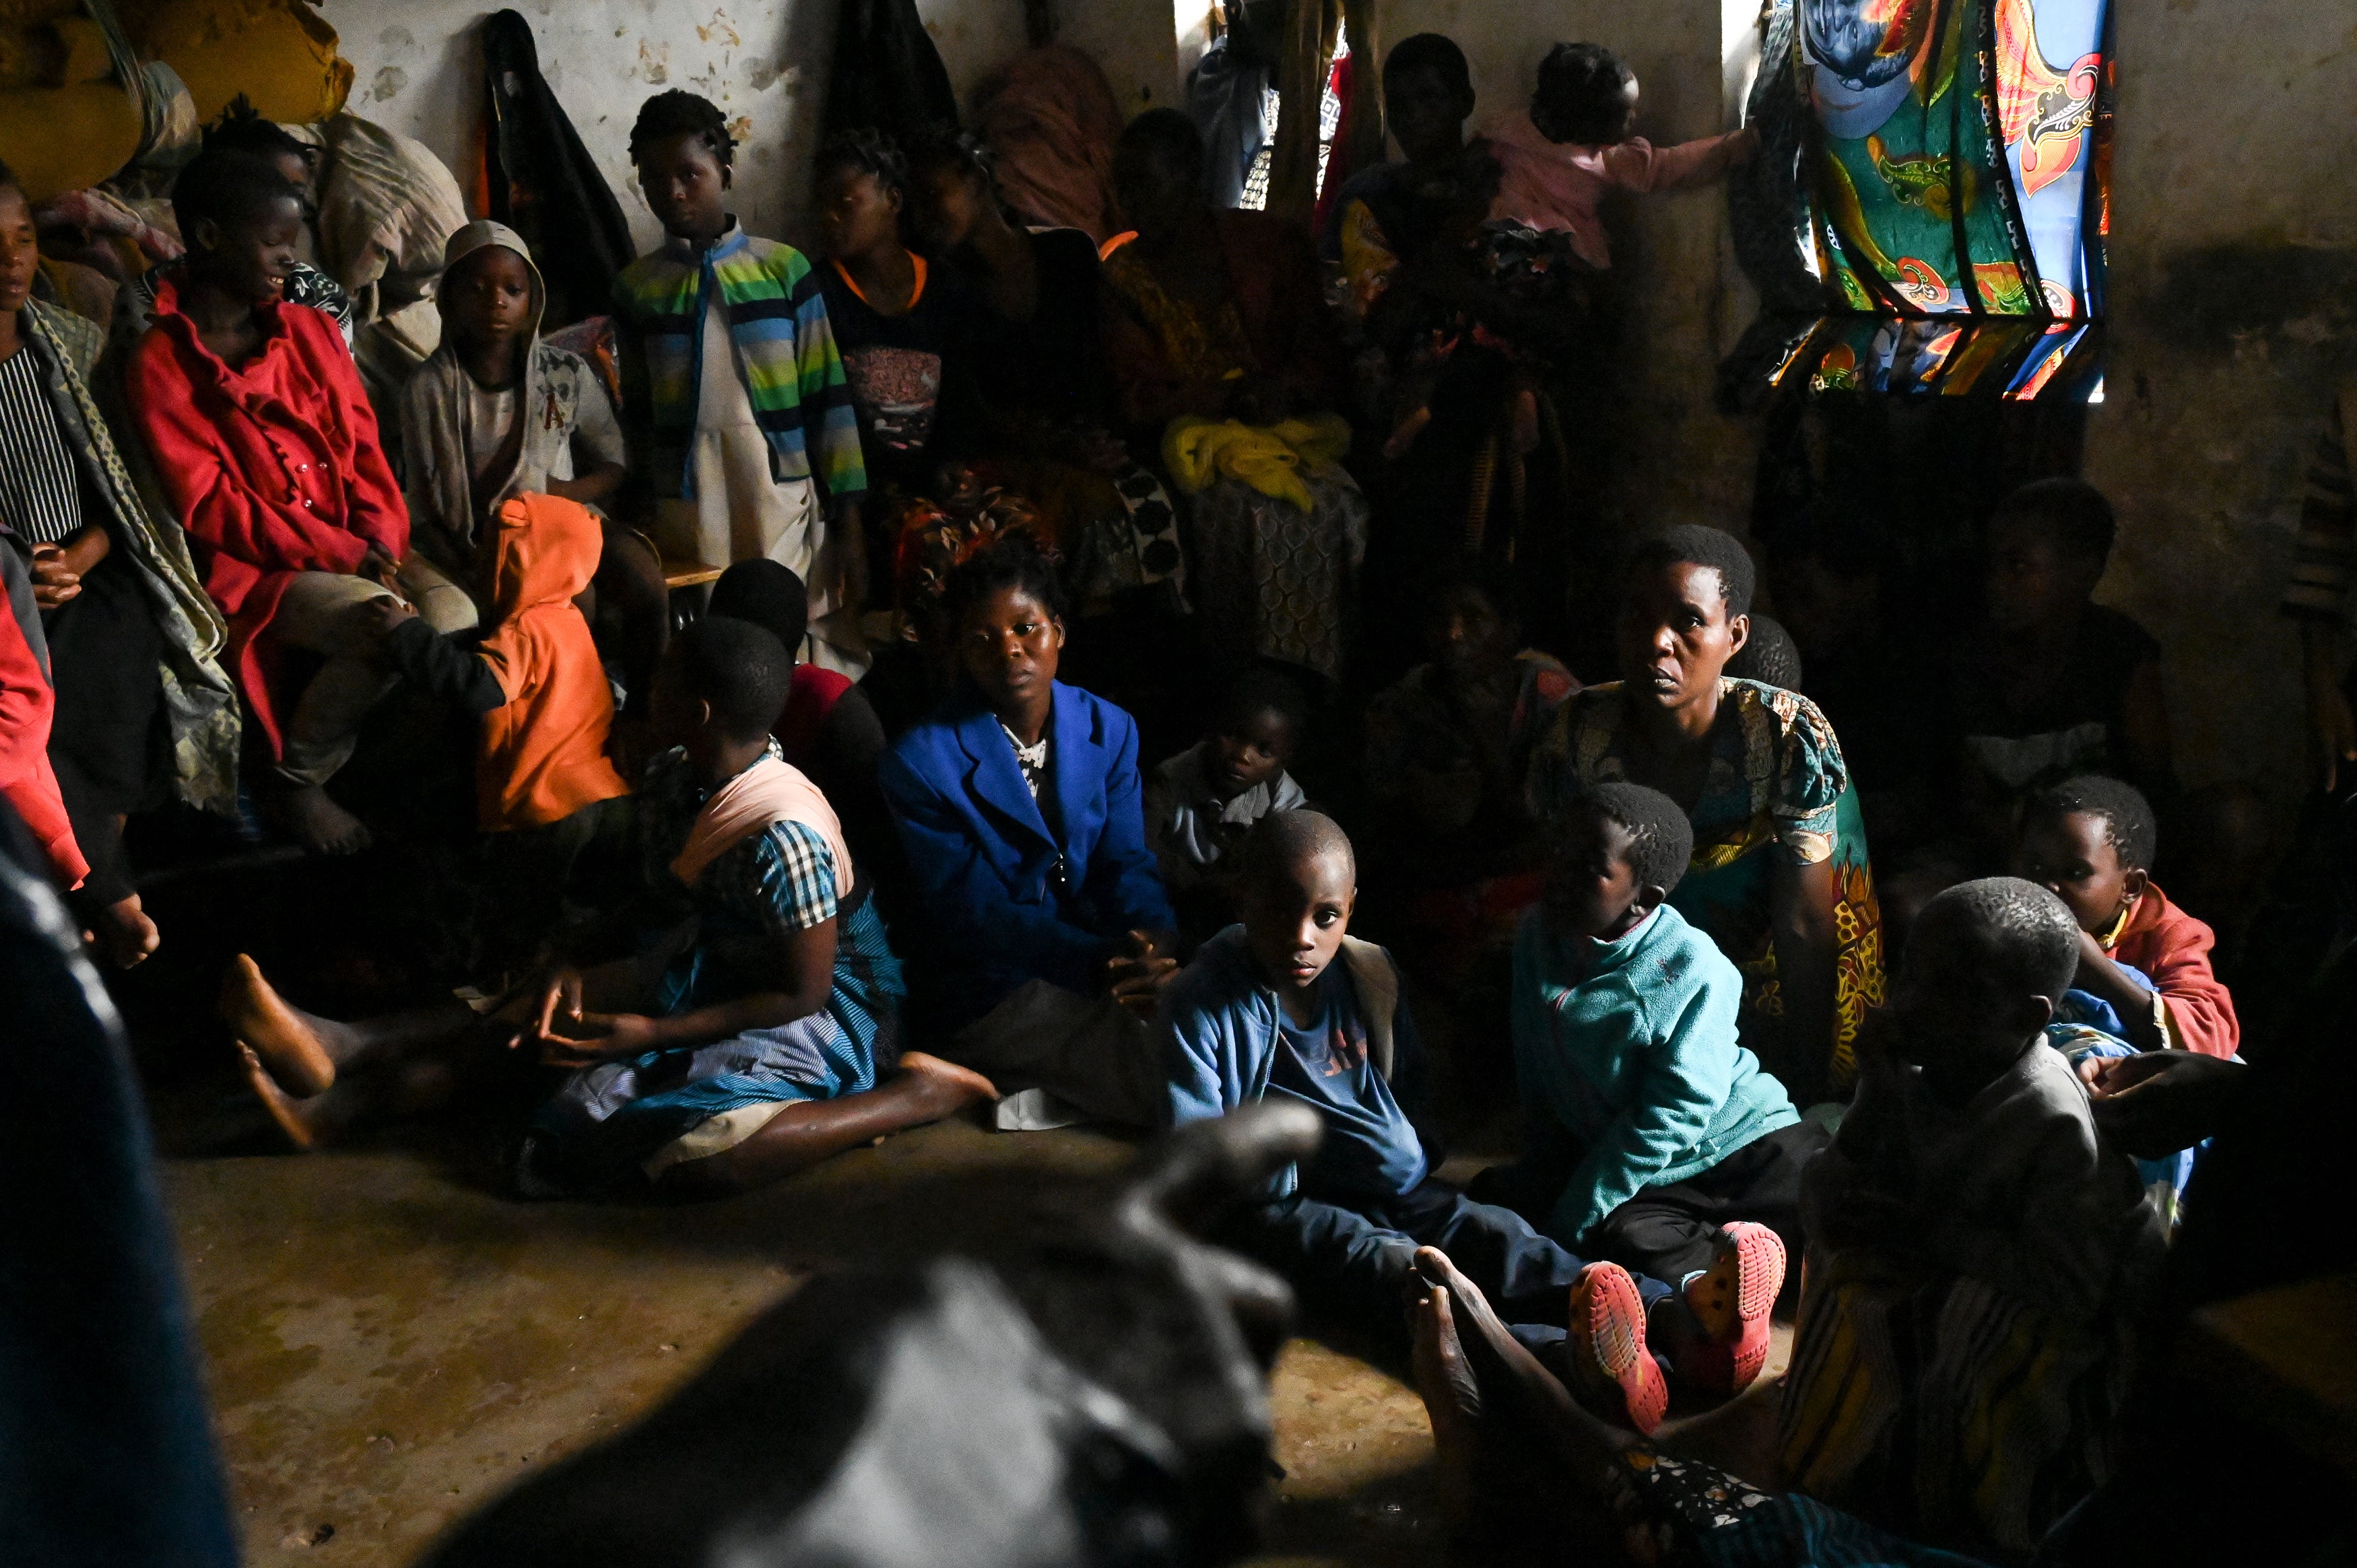 People at a displacement centre in Blantyre, Malawi on March 14.  (Photo: Thoko Chikondi, AP)